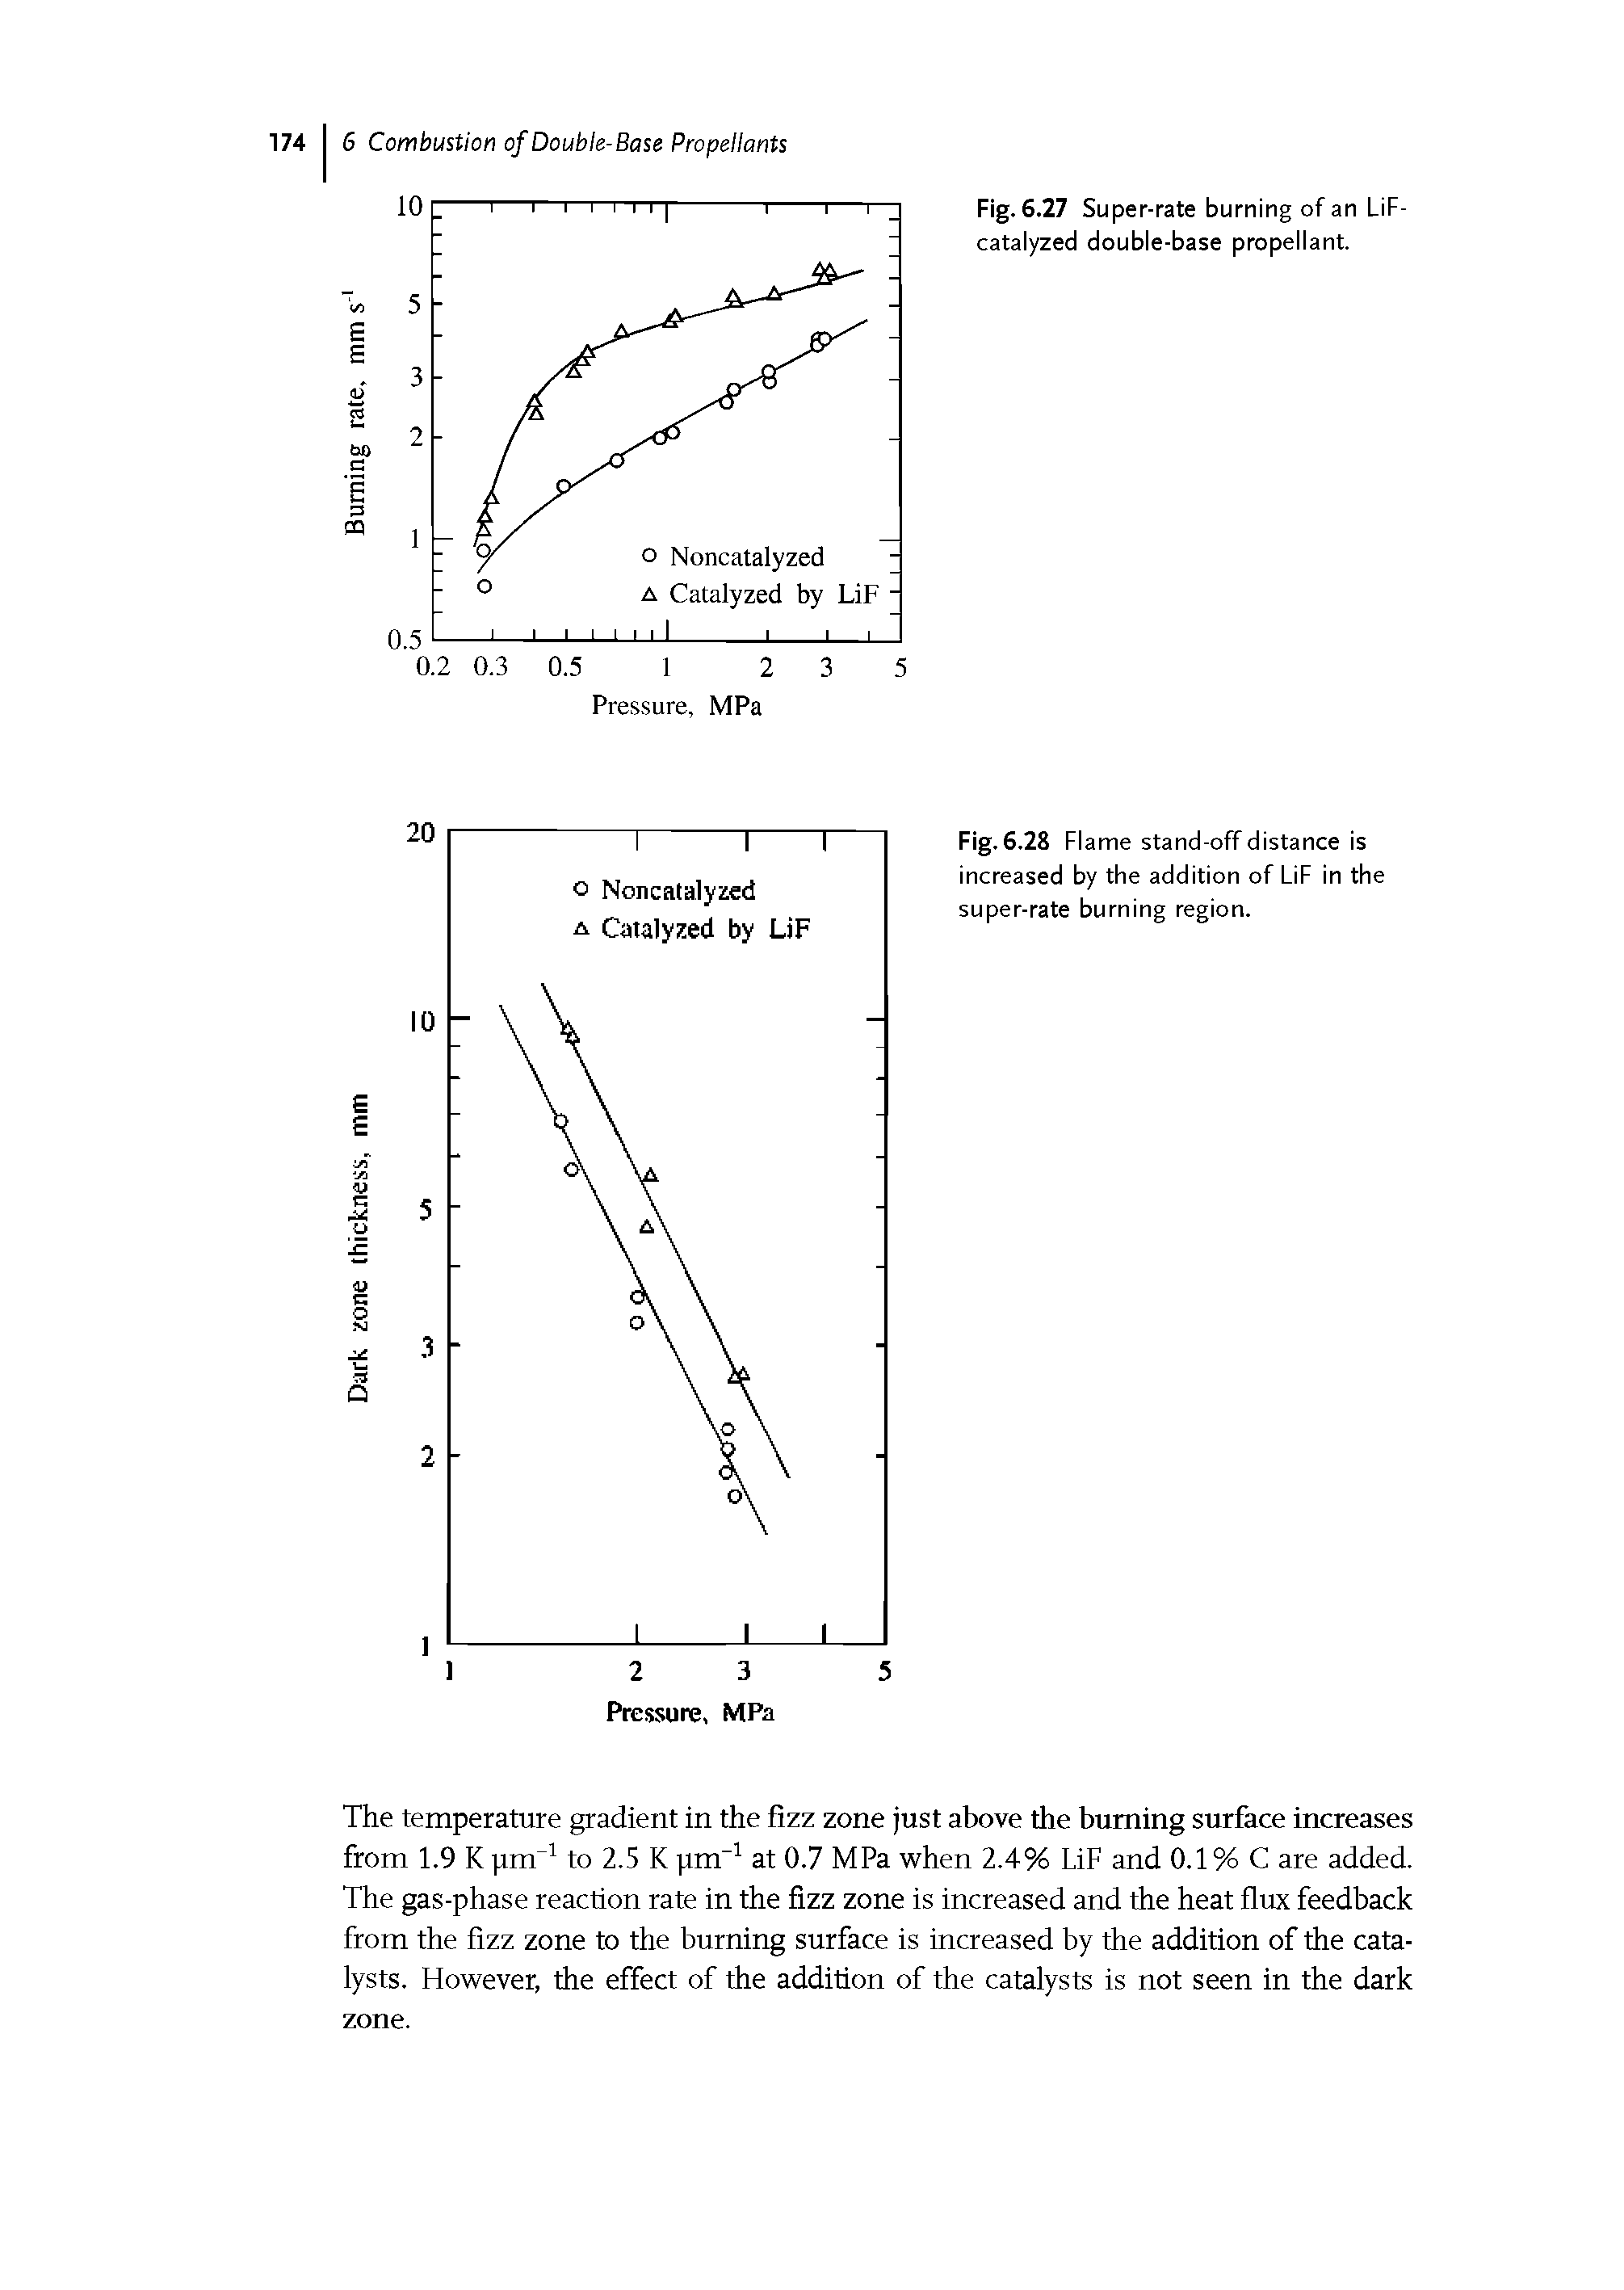 Fig. 6.27 Super-rate burning of an LiF-catalyzed double-base propellant.